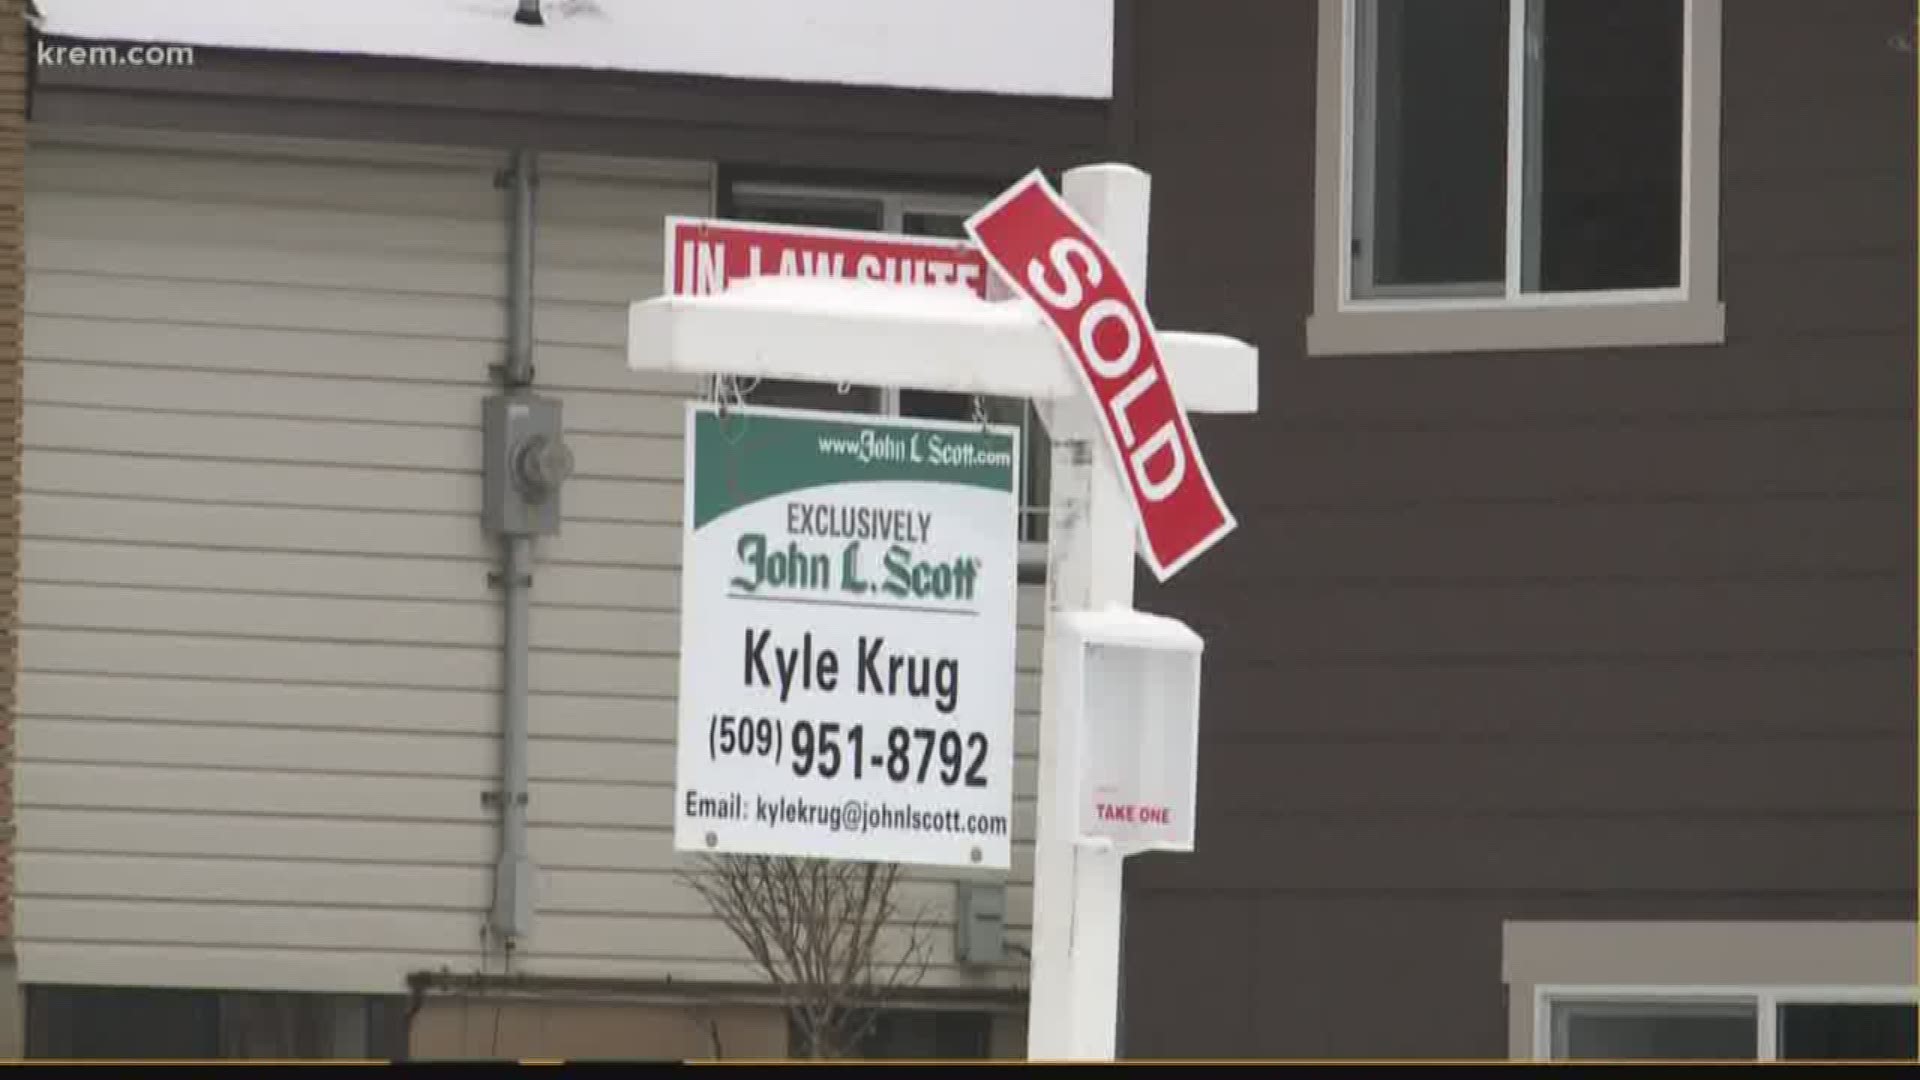 The number of sales went down in Spokane, but stayed steady in Coeur D'Alene.